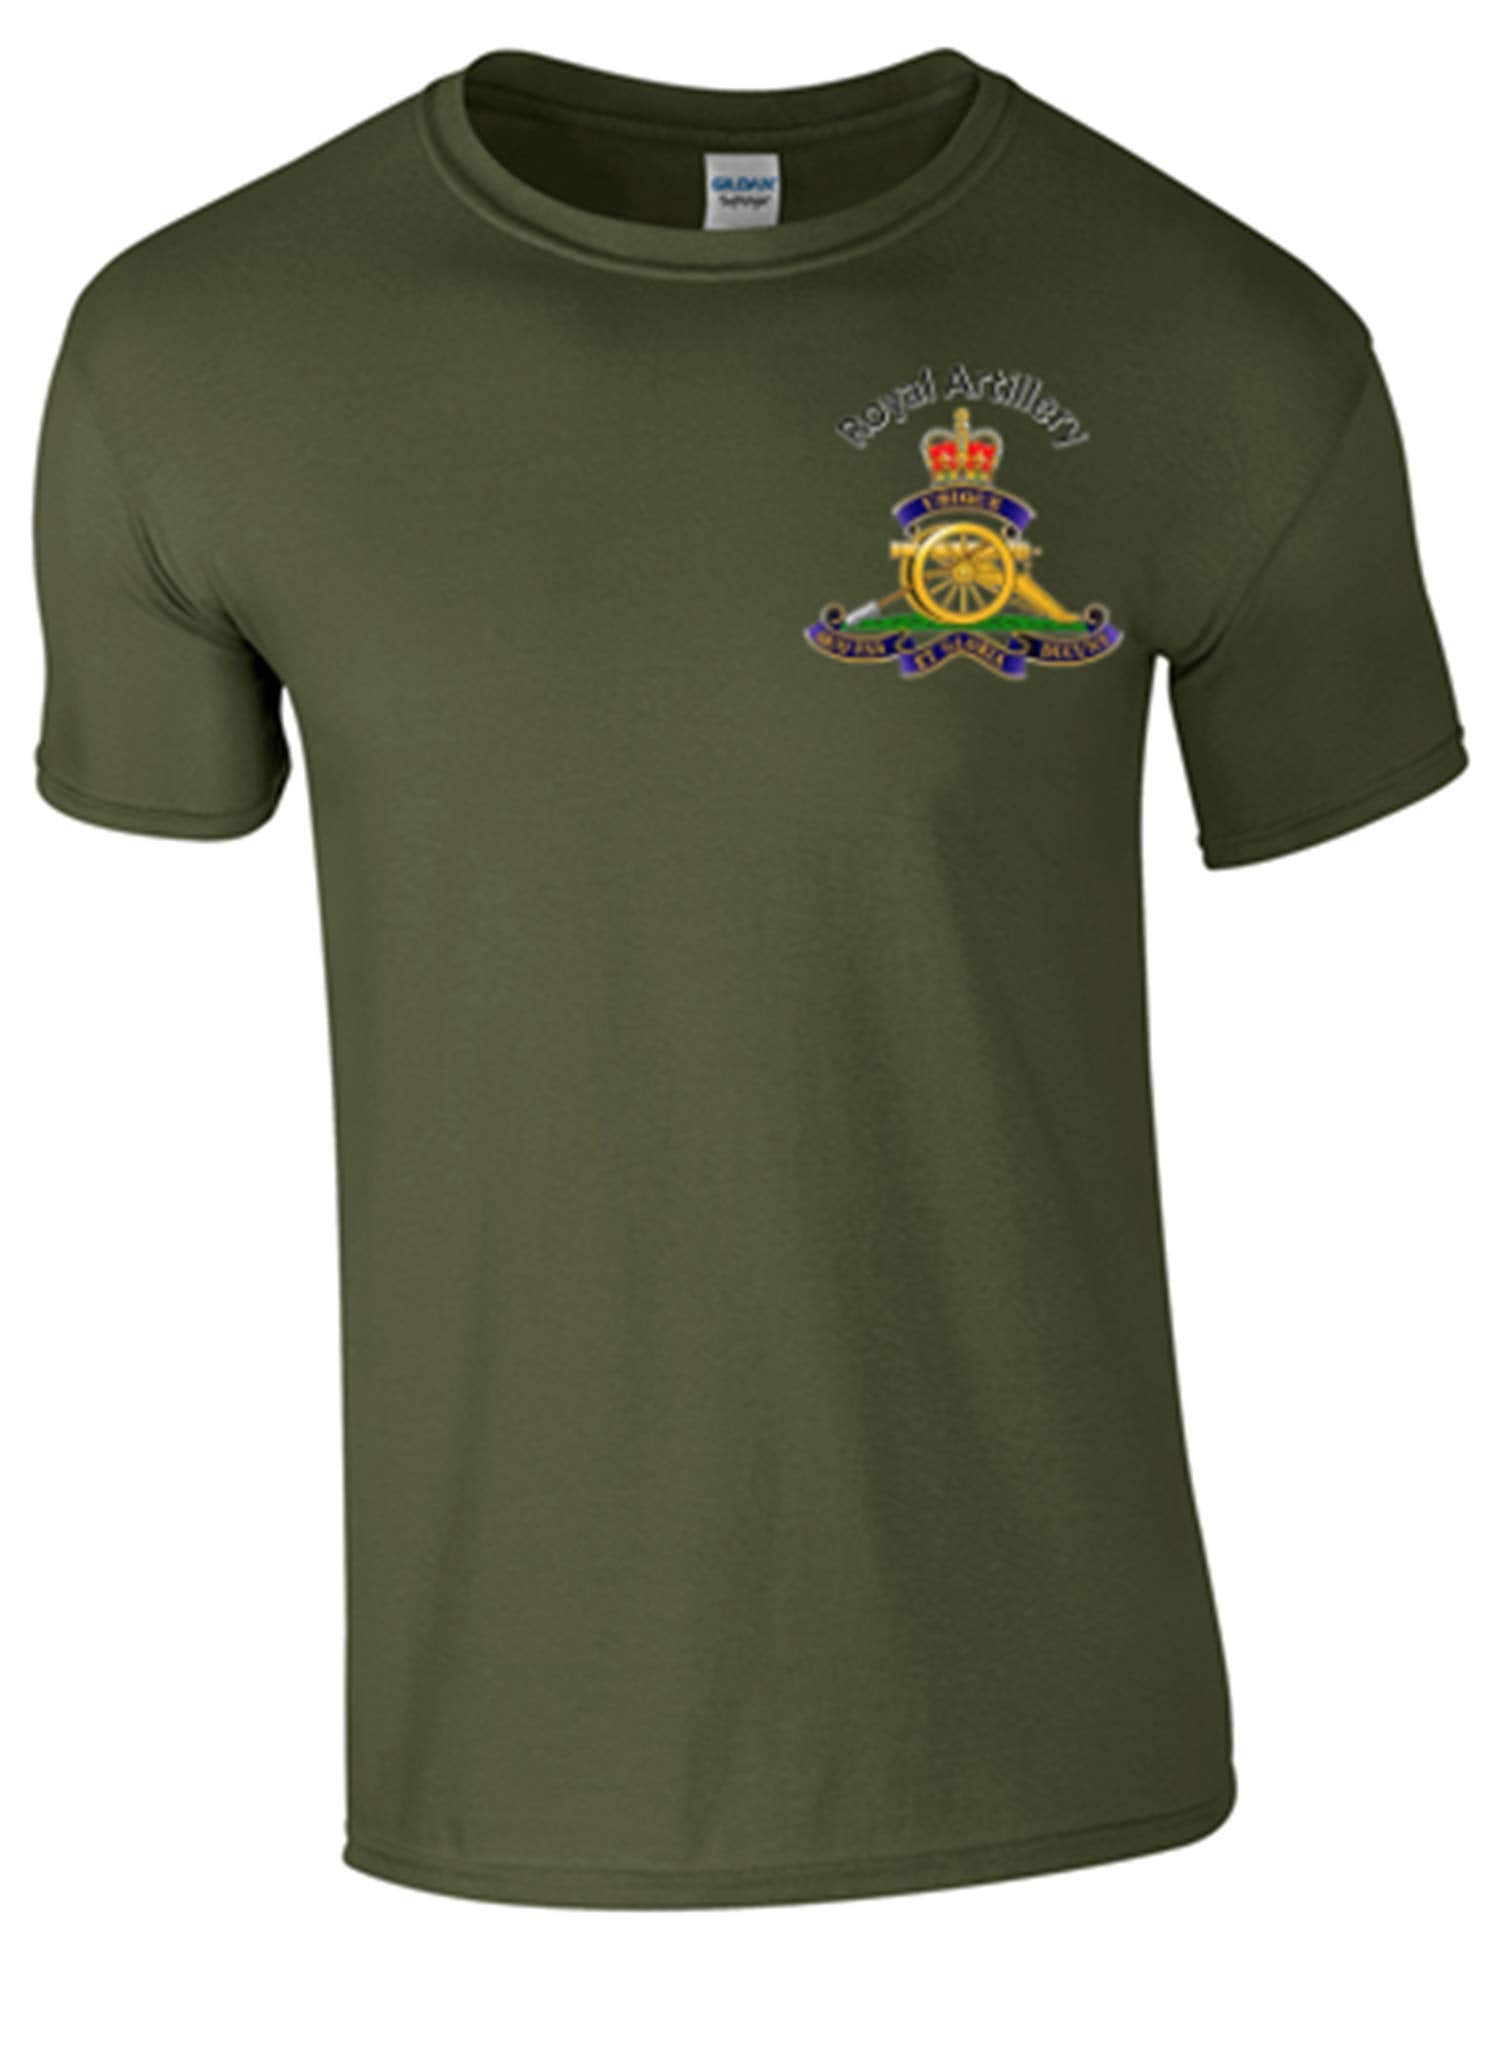 Army 1157 Kit The Royal Regiment of Artillery T-Shirt (S) - Army 1157 kit Army 1157 Kit